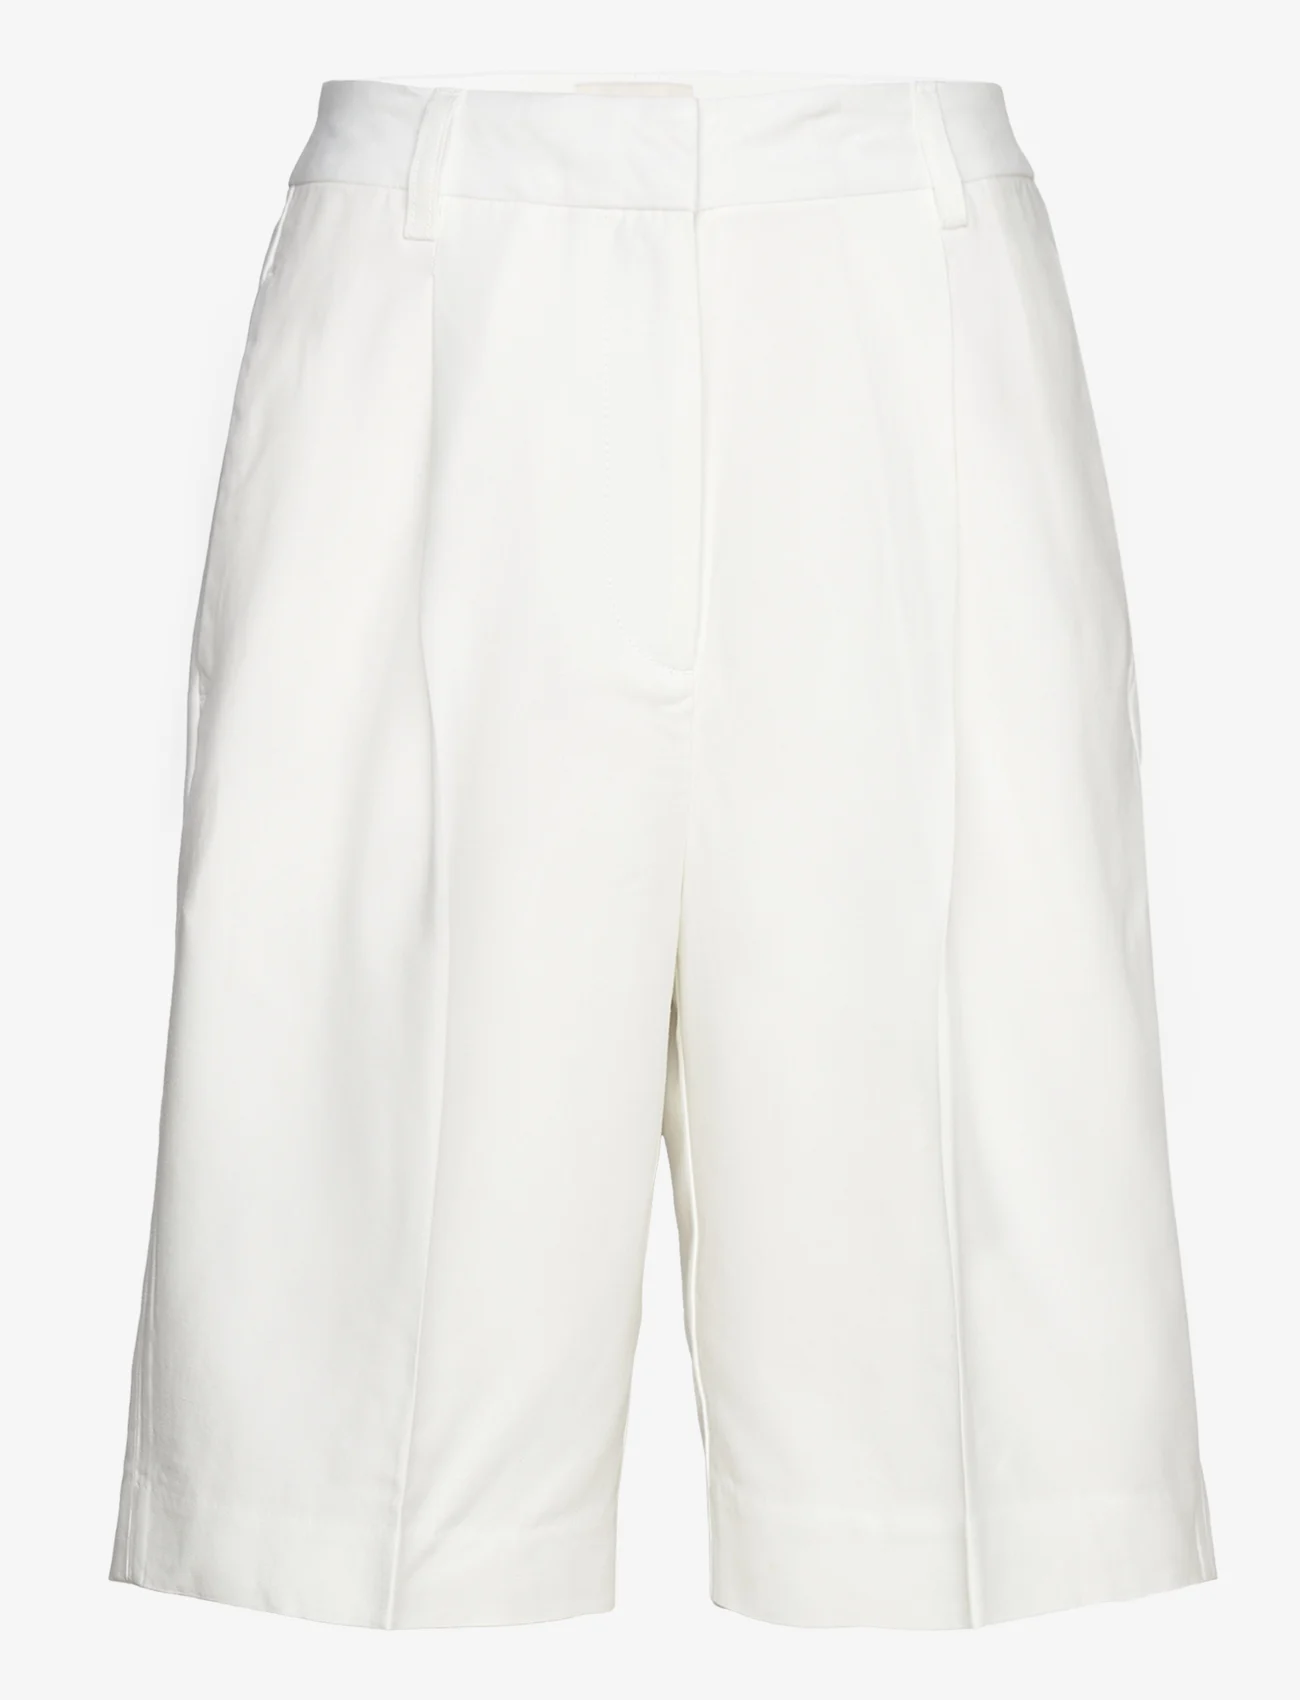 GANT - RELAXED PLEATED SHORTS - white - 0